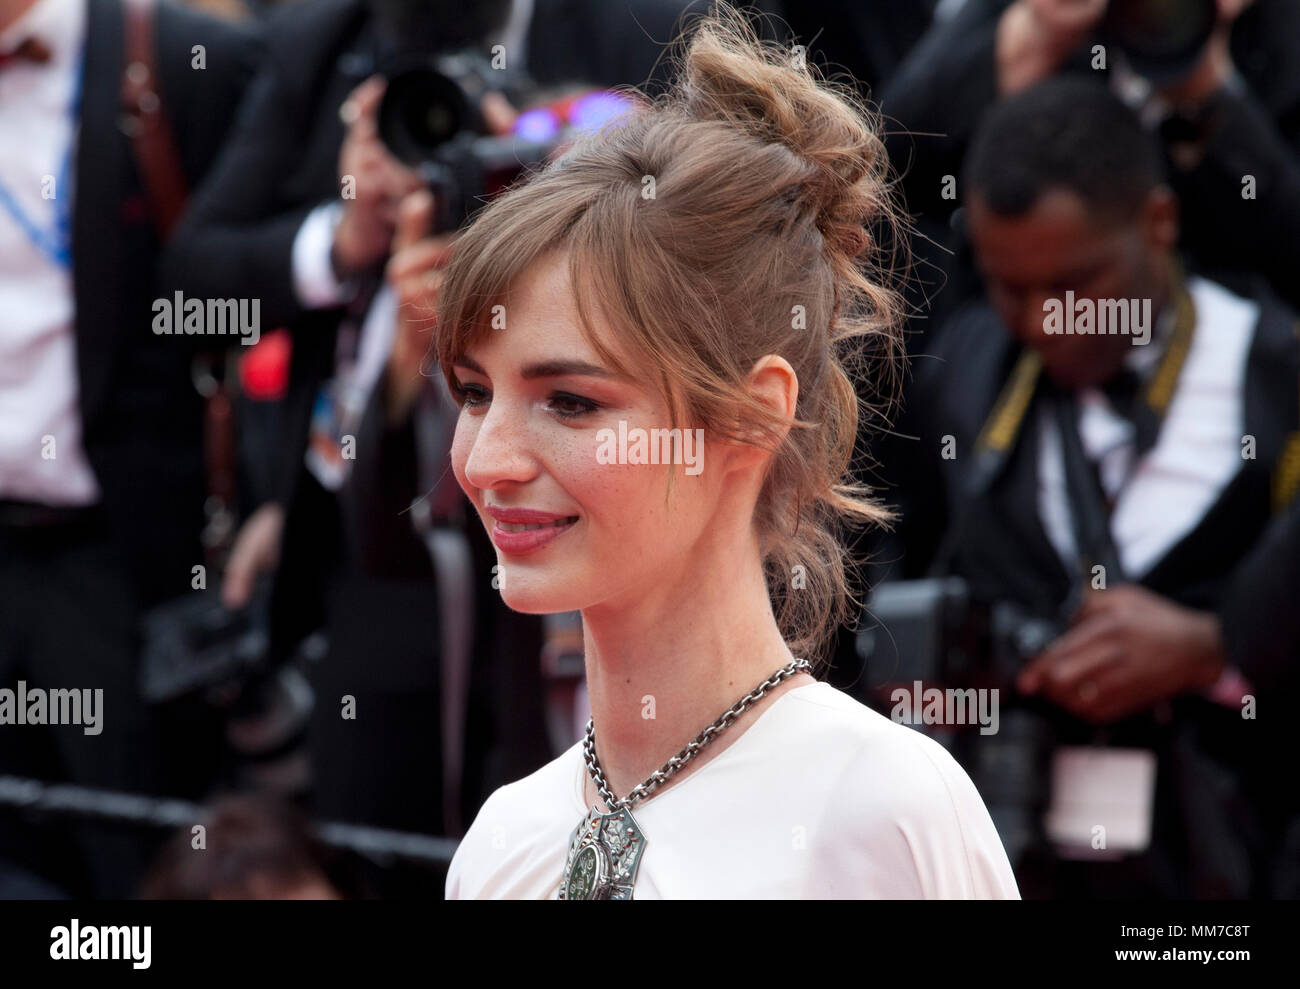 Cannes, France. 9th May 2018. Louise Bourgoin at the Yomeddine gala screening at the 71st Cannes Film Festival, Wednesday 9th May 2018, Cannes, France. Photo credit: Doreen Kennedy Credit: Doreen Kennedy/Alamy Live News Stock Photo